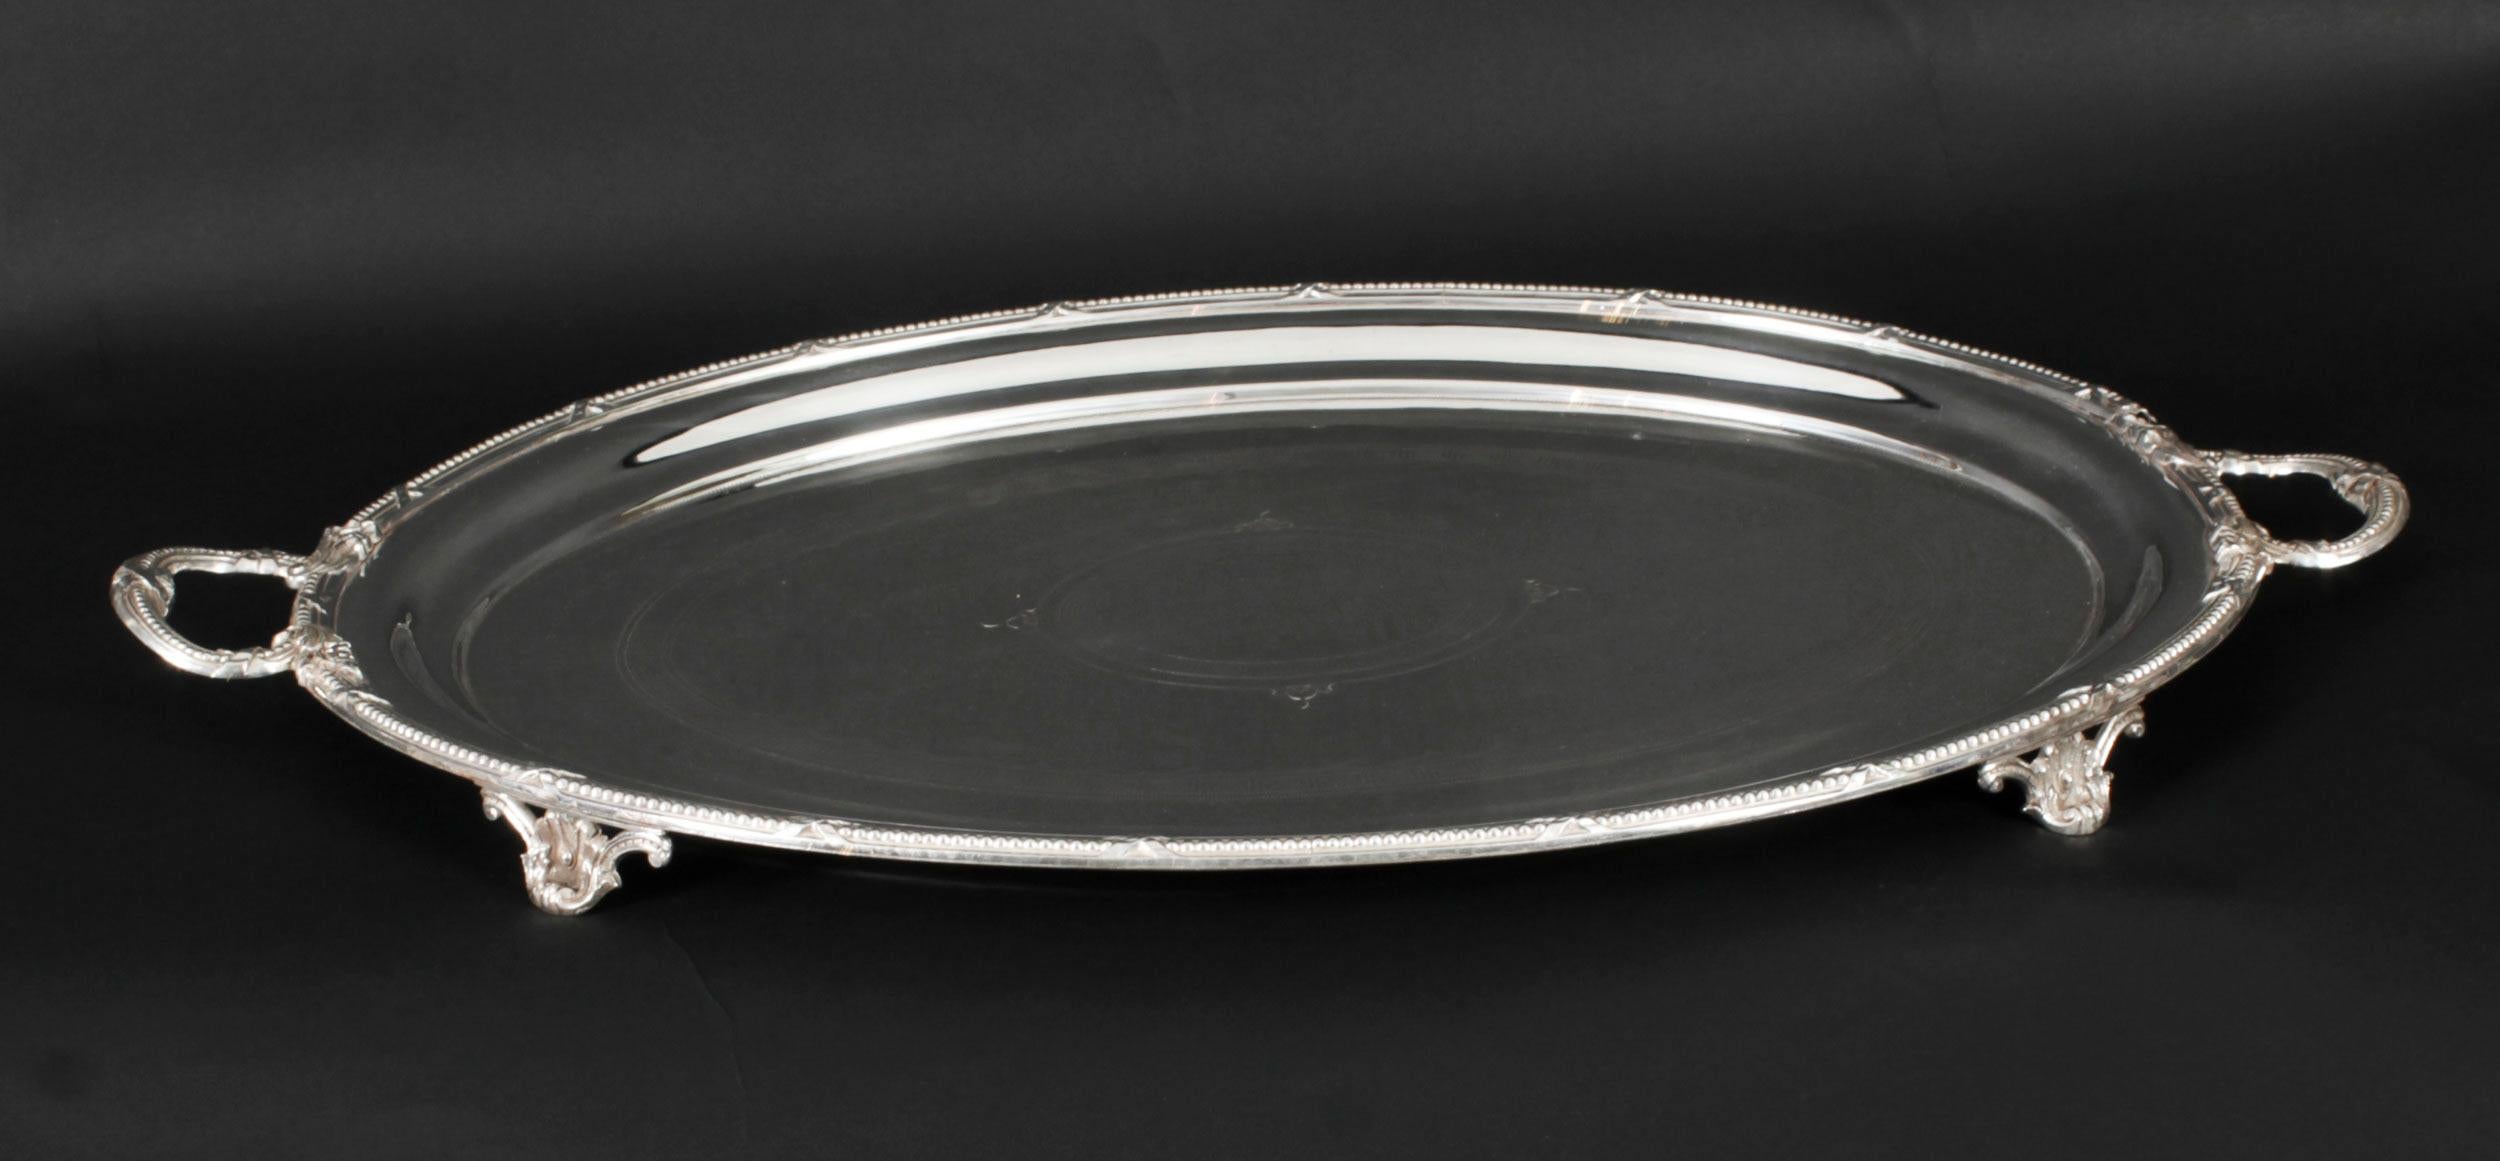 This is a momumental beautiful antique German oval silver-plated twin handled tray by I.H.Peters & Co, Hamburg,  dating from the mid 19th Cntury.

The tray is of oval form, with a bow-tied beaded border, and two foliate capped handles. It is